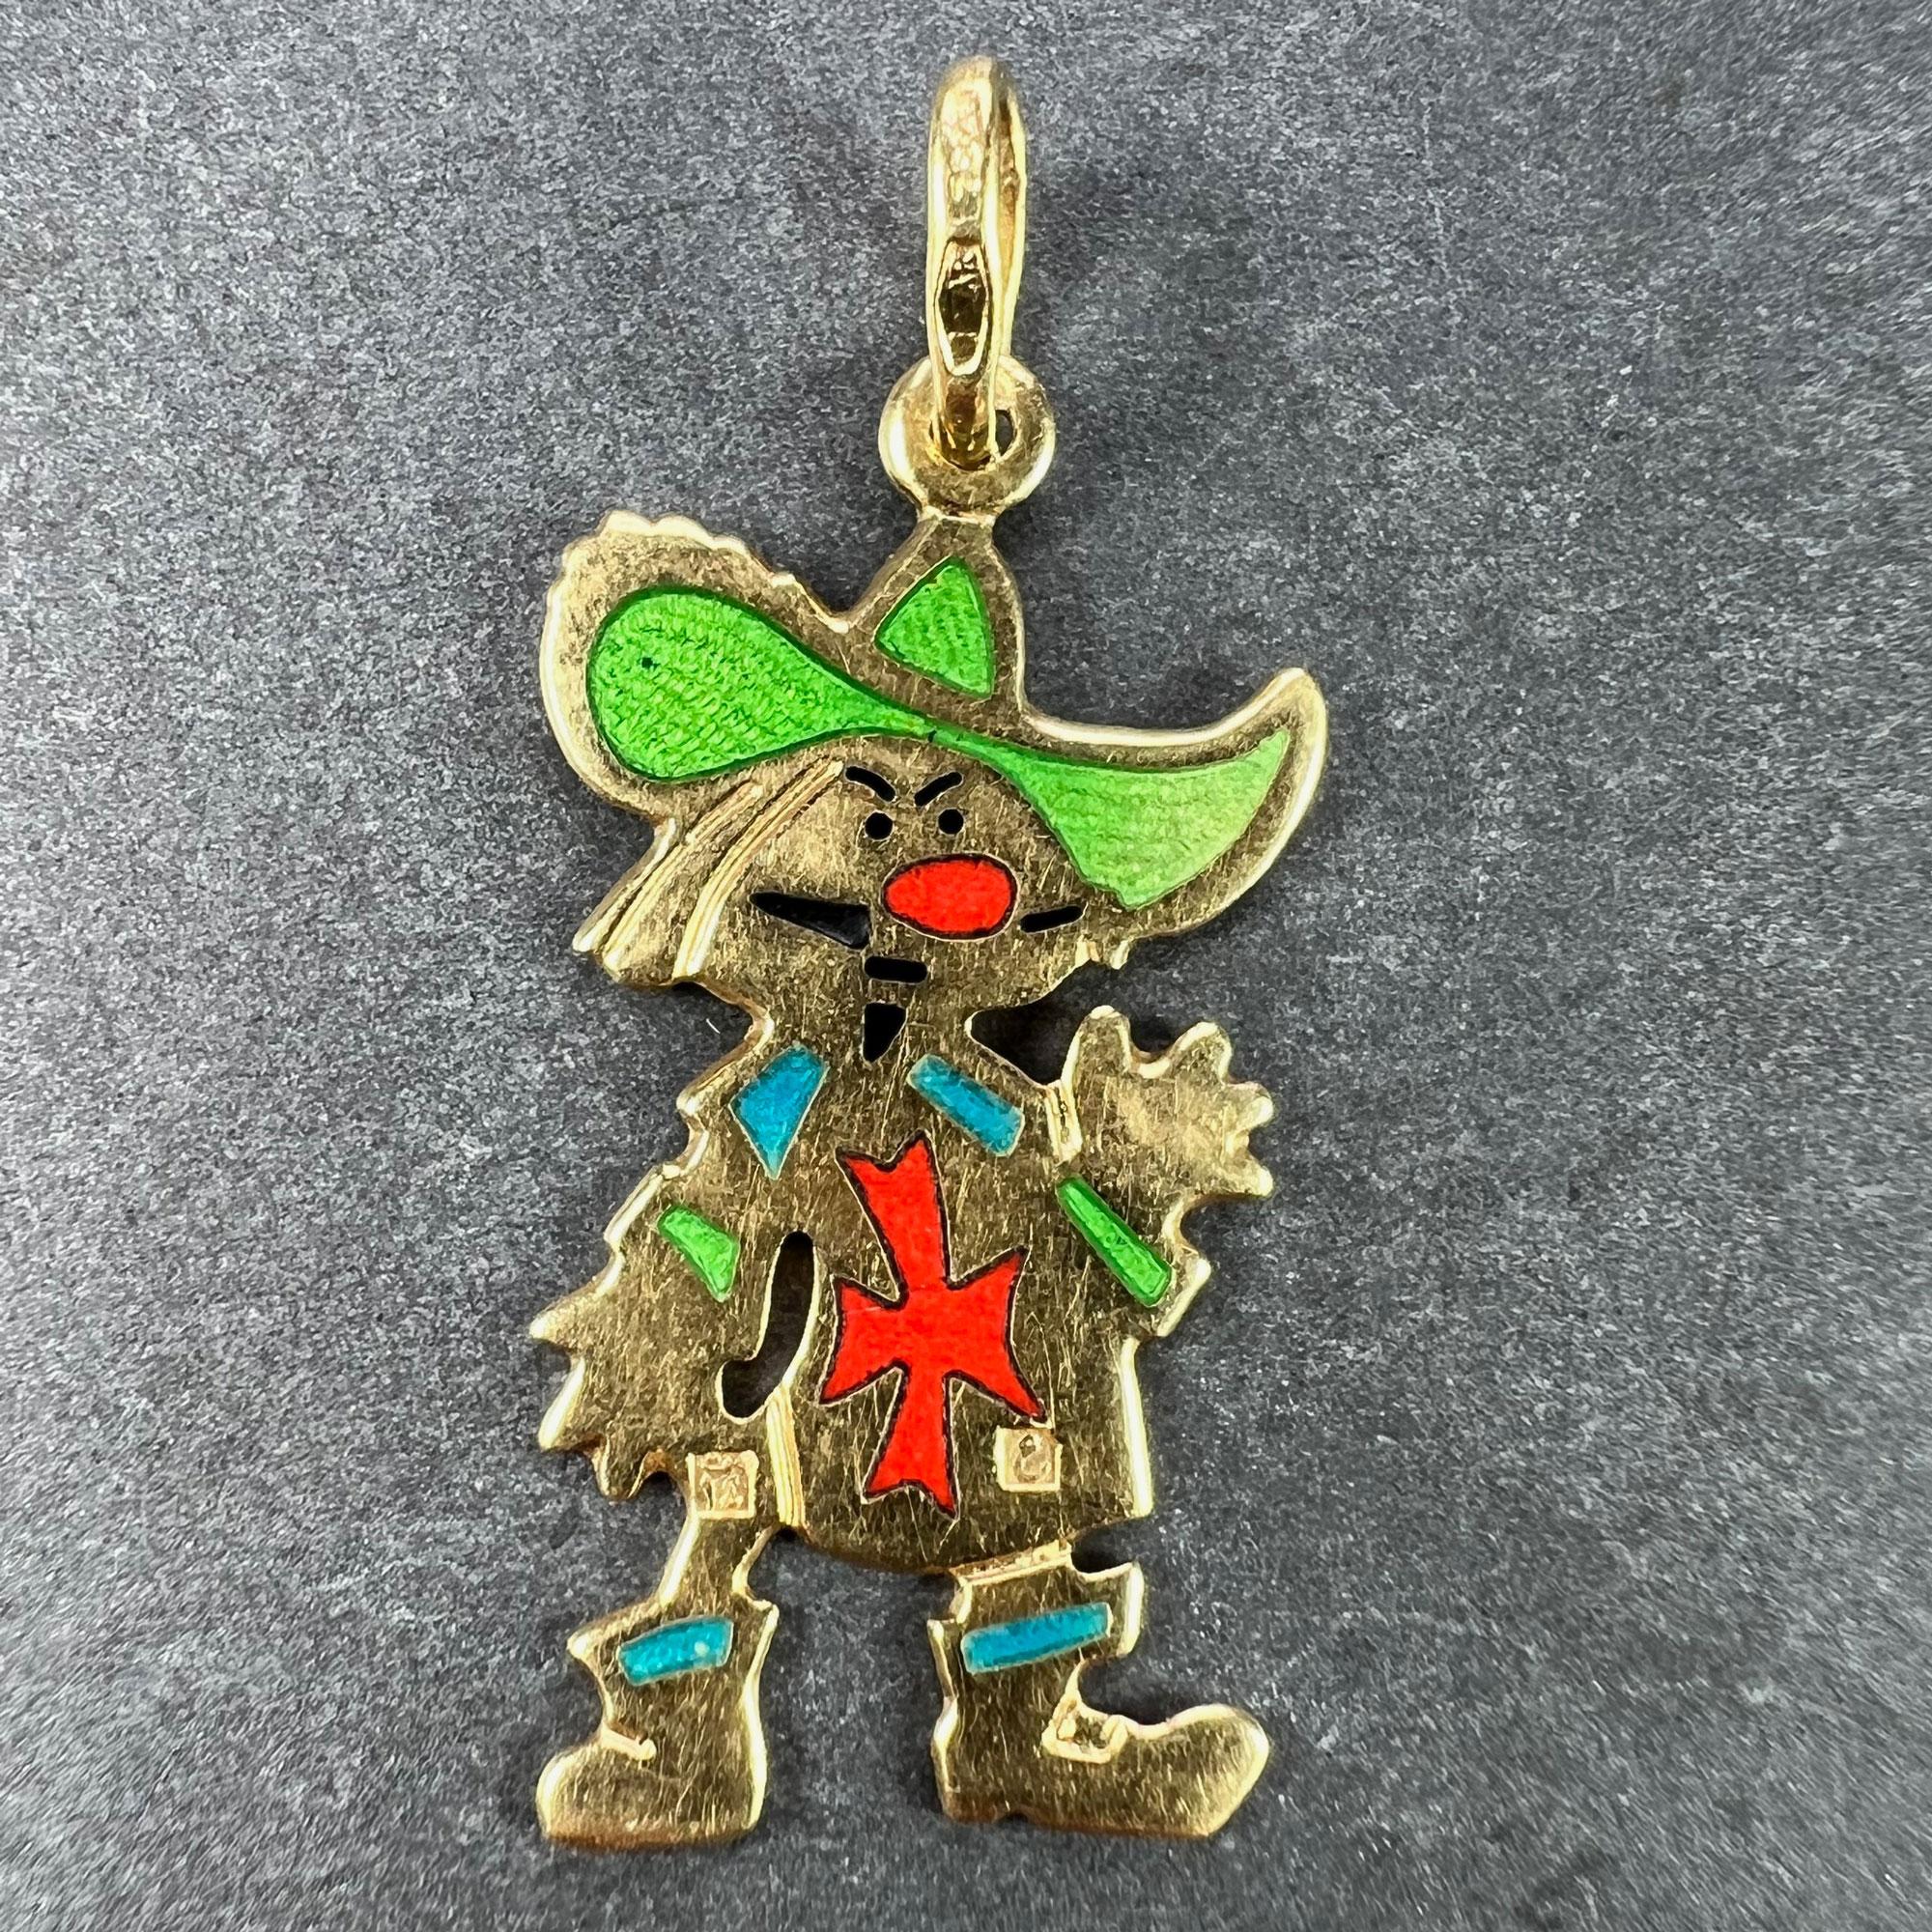 An Italian 18 karat (18K) yellow gold charm pendant designed as a cartoon muskateer with red, blue, green and black enamel detail.

Stamped 750 for 18 karat gold, 1AR for Italian manufacture and UnoAErre, along with their maker's mark.

Dimensions: